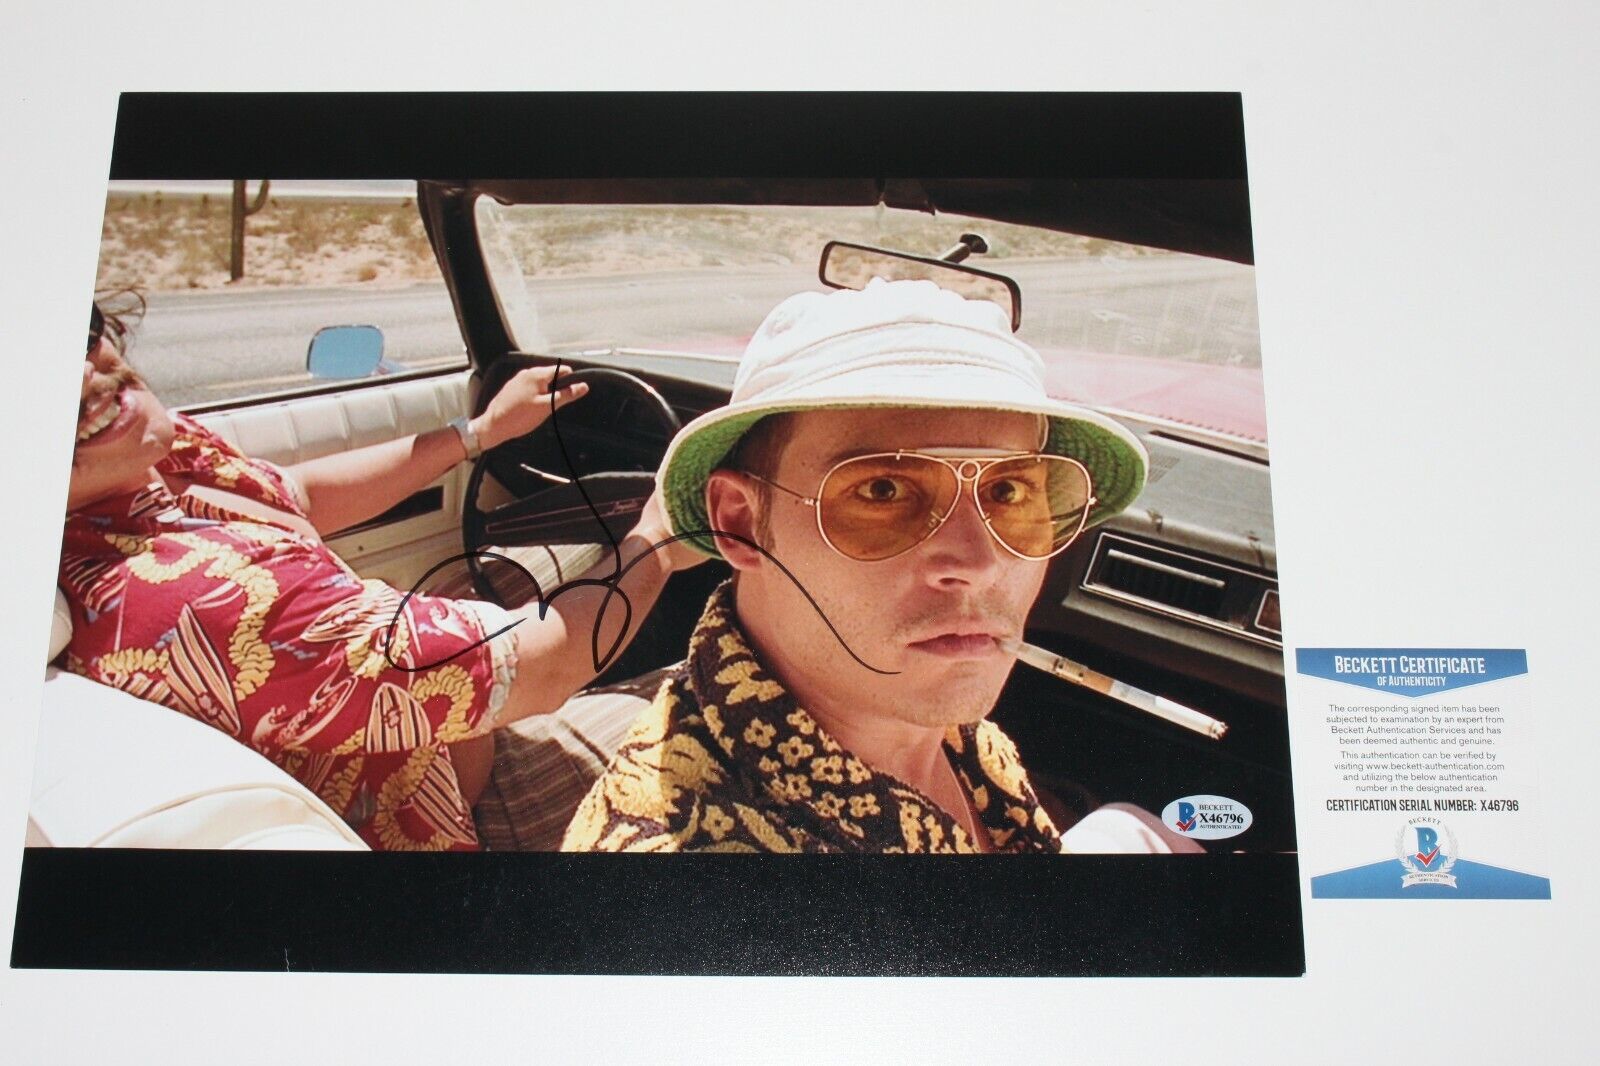 JOHNNY DEPP SIGNED FEAR AND LOATHING IN LAS VEGAS 11x14 MOVIE Photo Poster painting BECKETT COA~